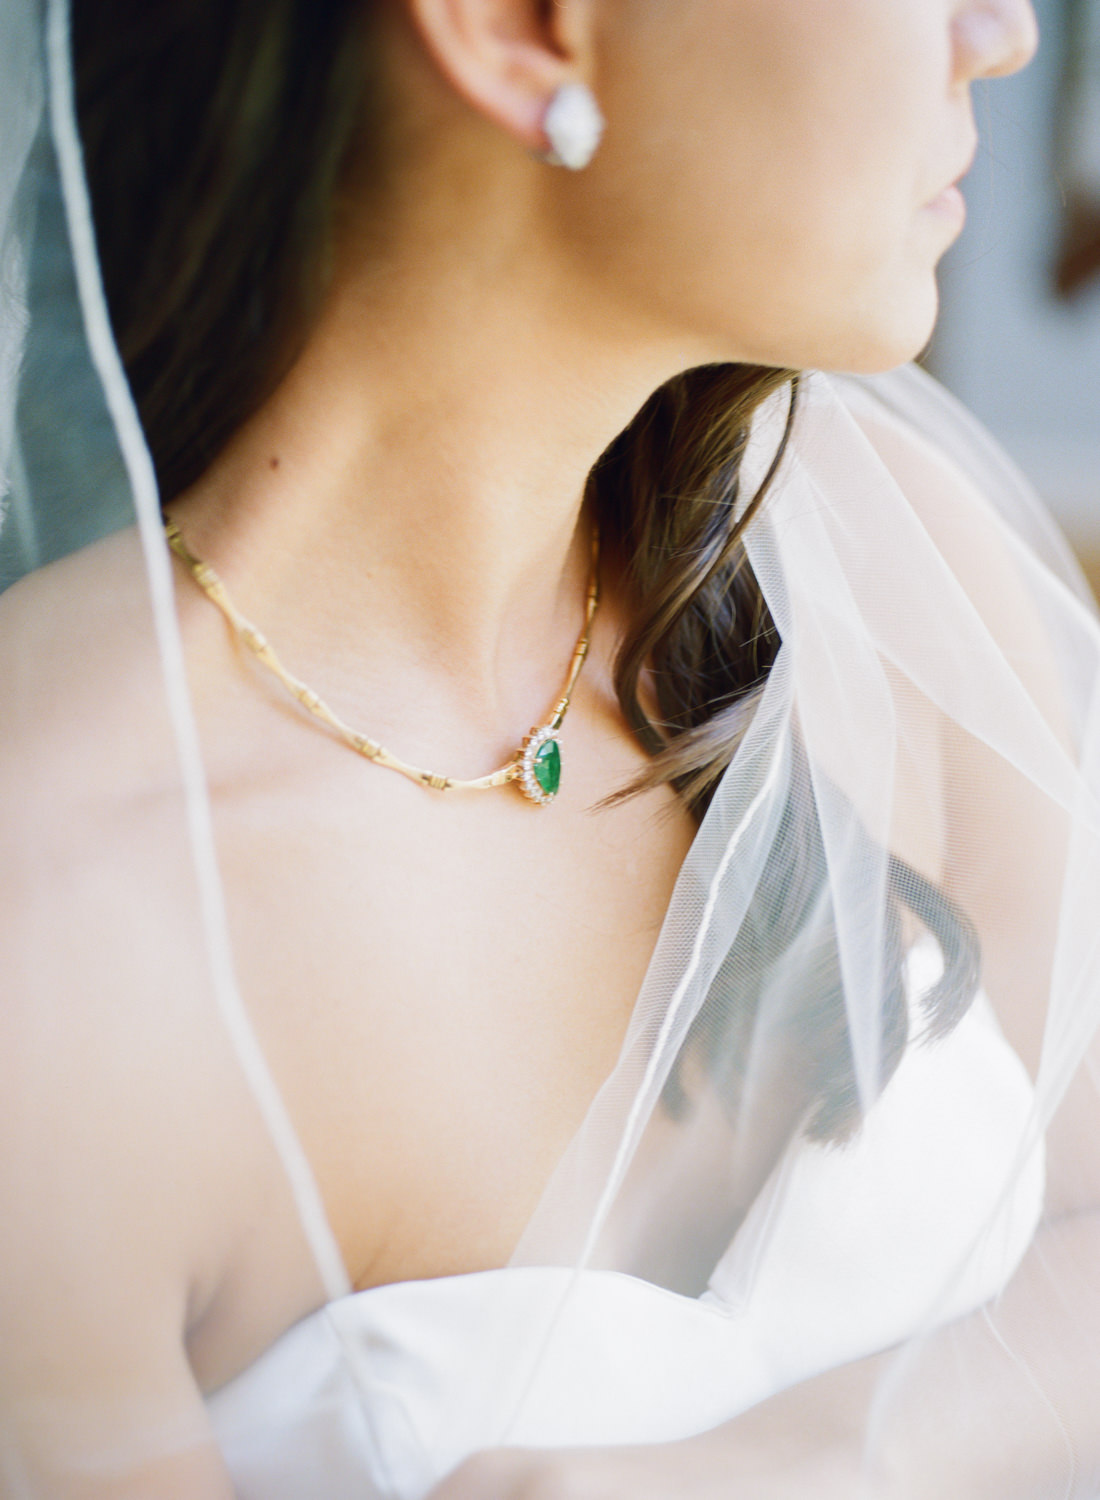 Bride wearing green and gold necklace; St. Louis fine art film wedding photographer Erica Robnett Photography